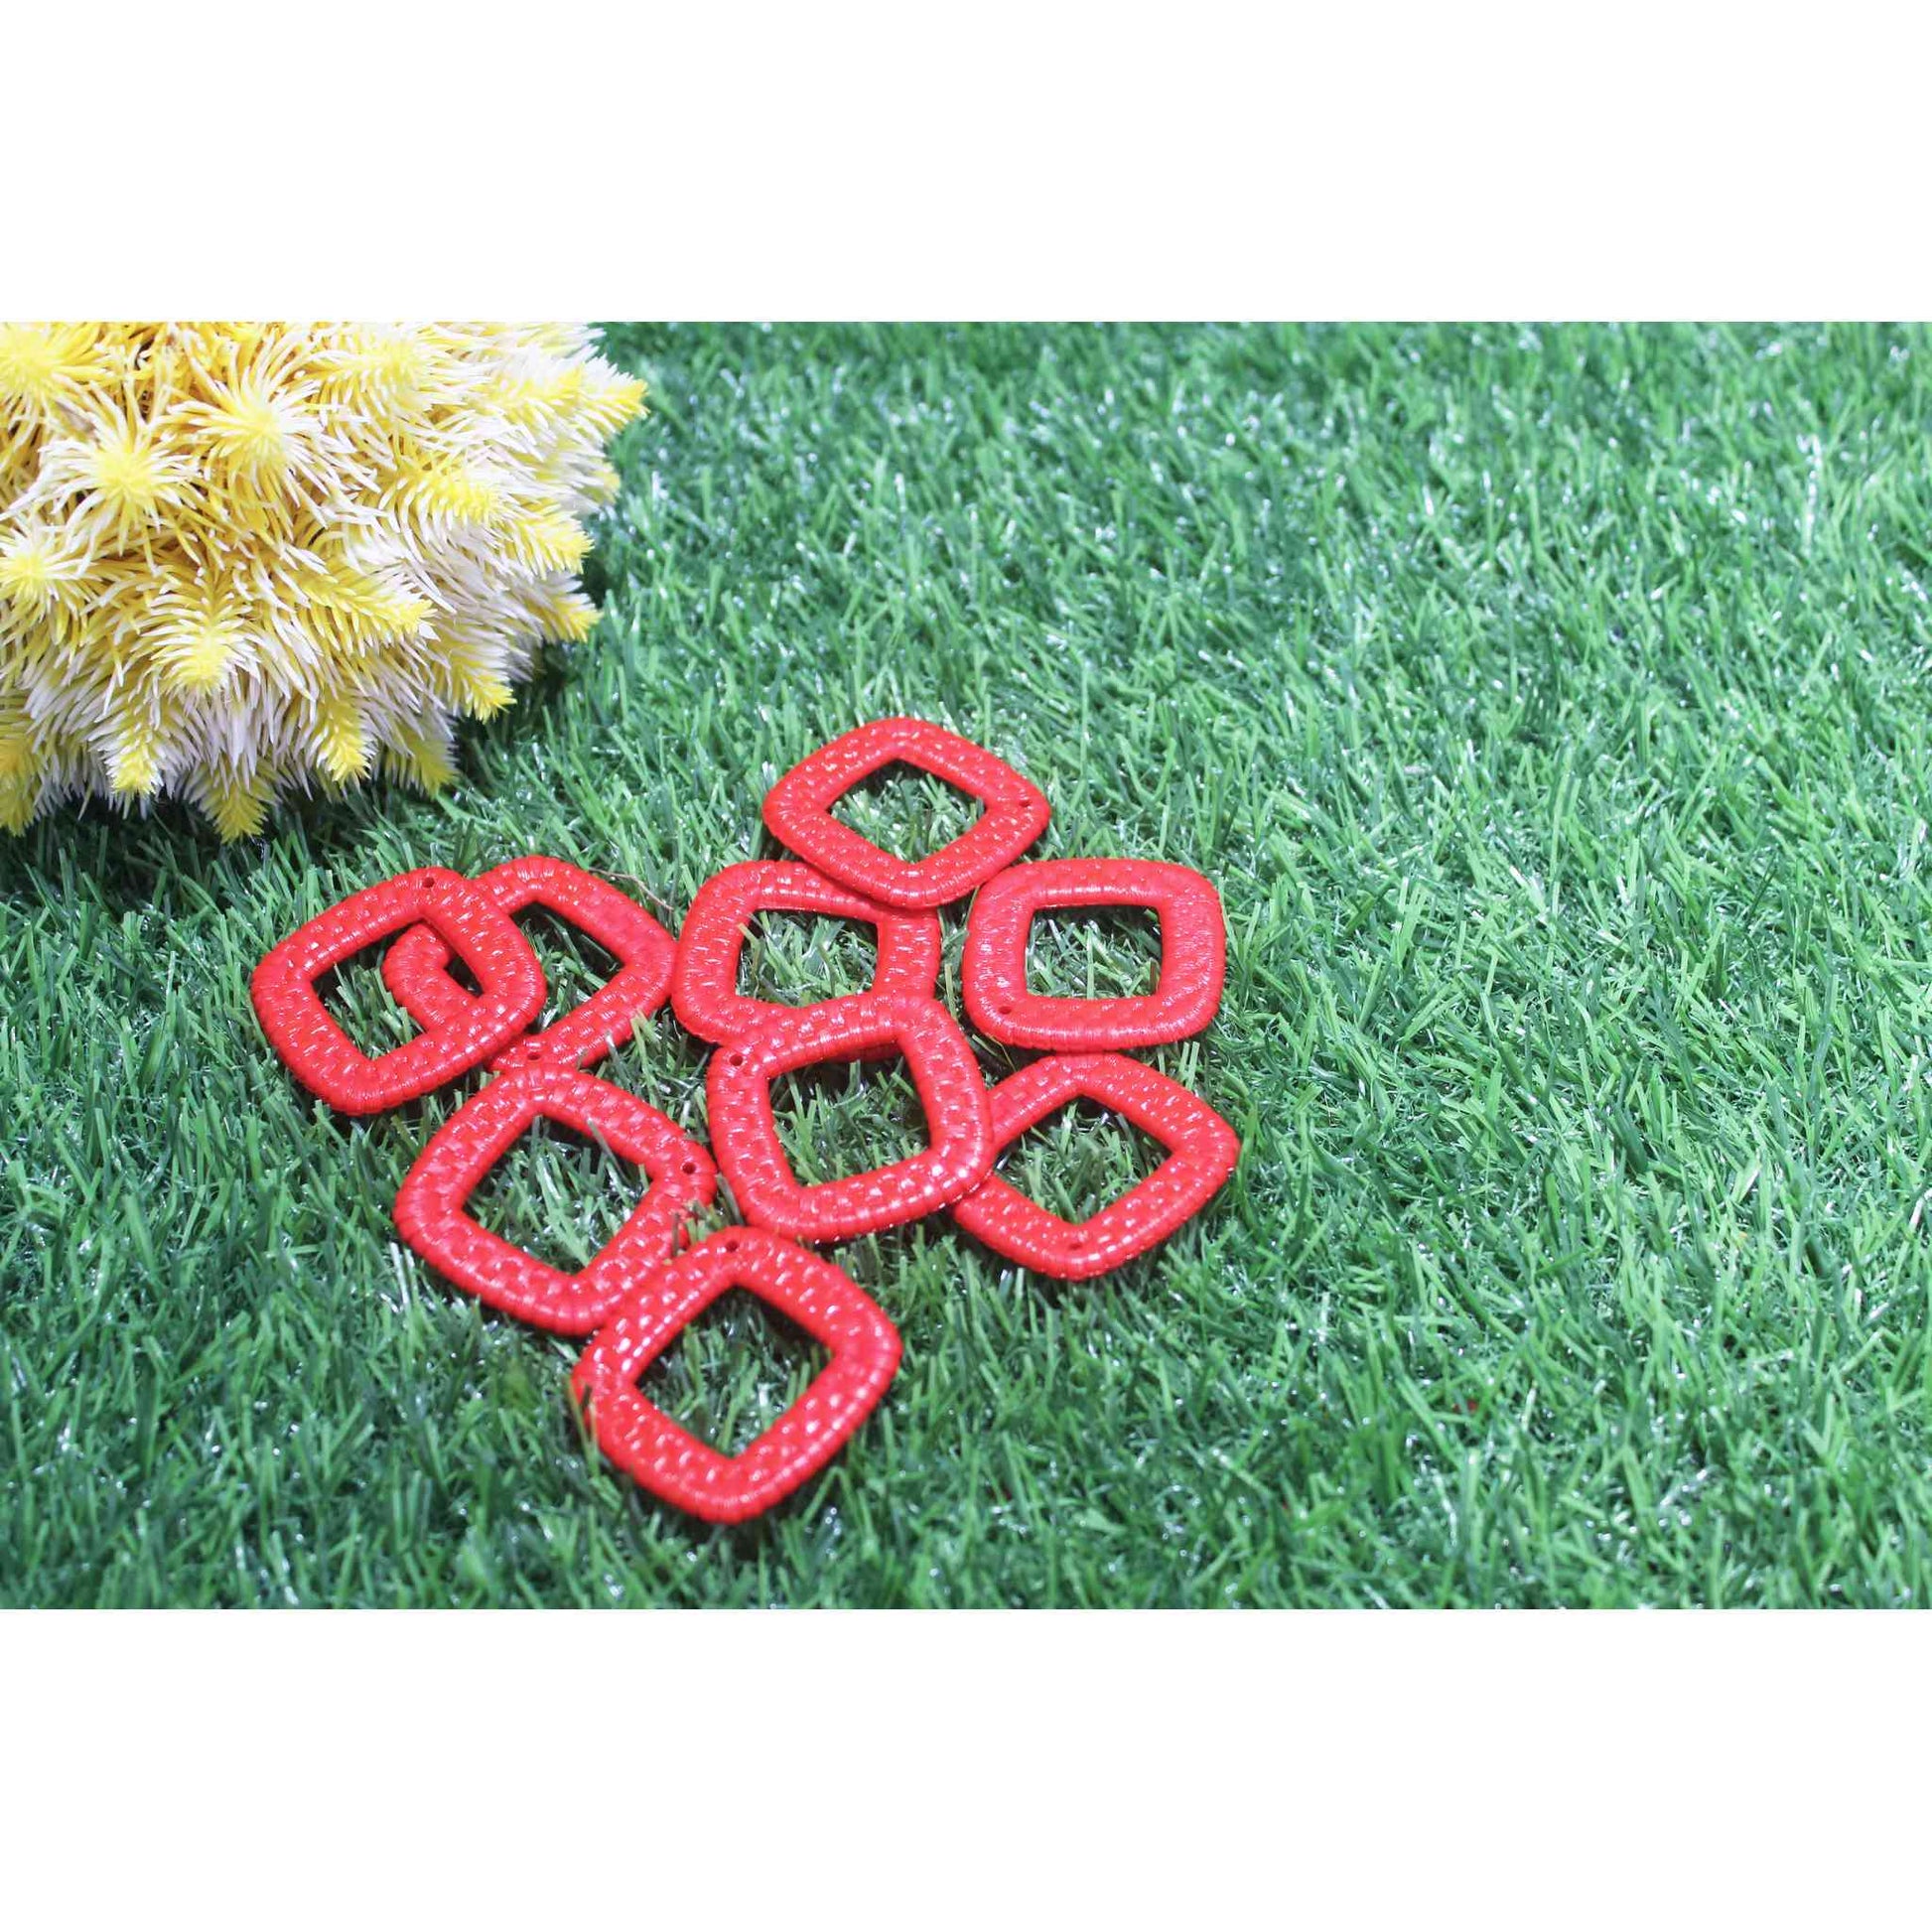 Indian Petals Beautiful Flat Braided Style Base for DIY Craft, Trousseau Packing or Decoration, Square, Red - Indian Petals